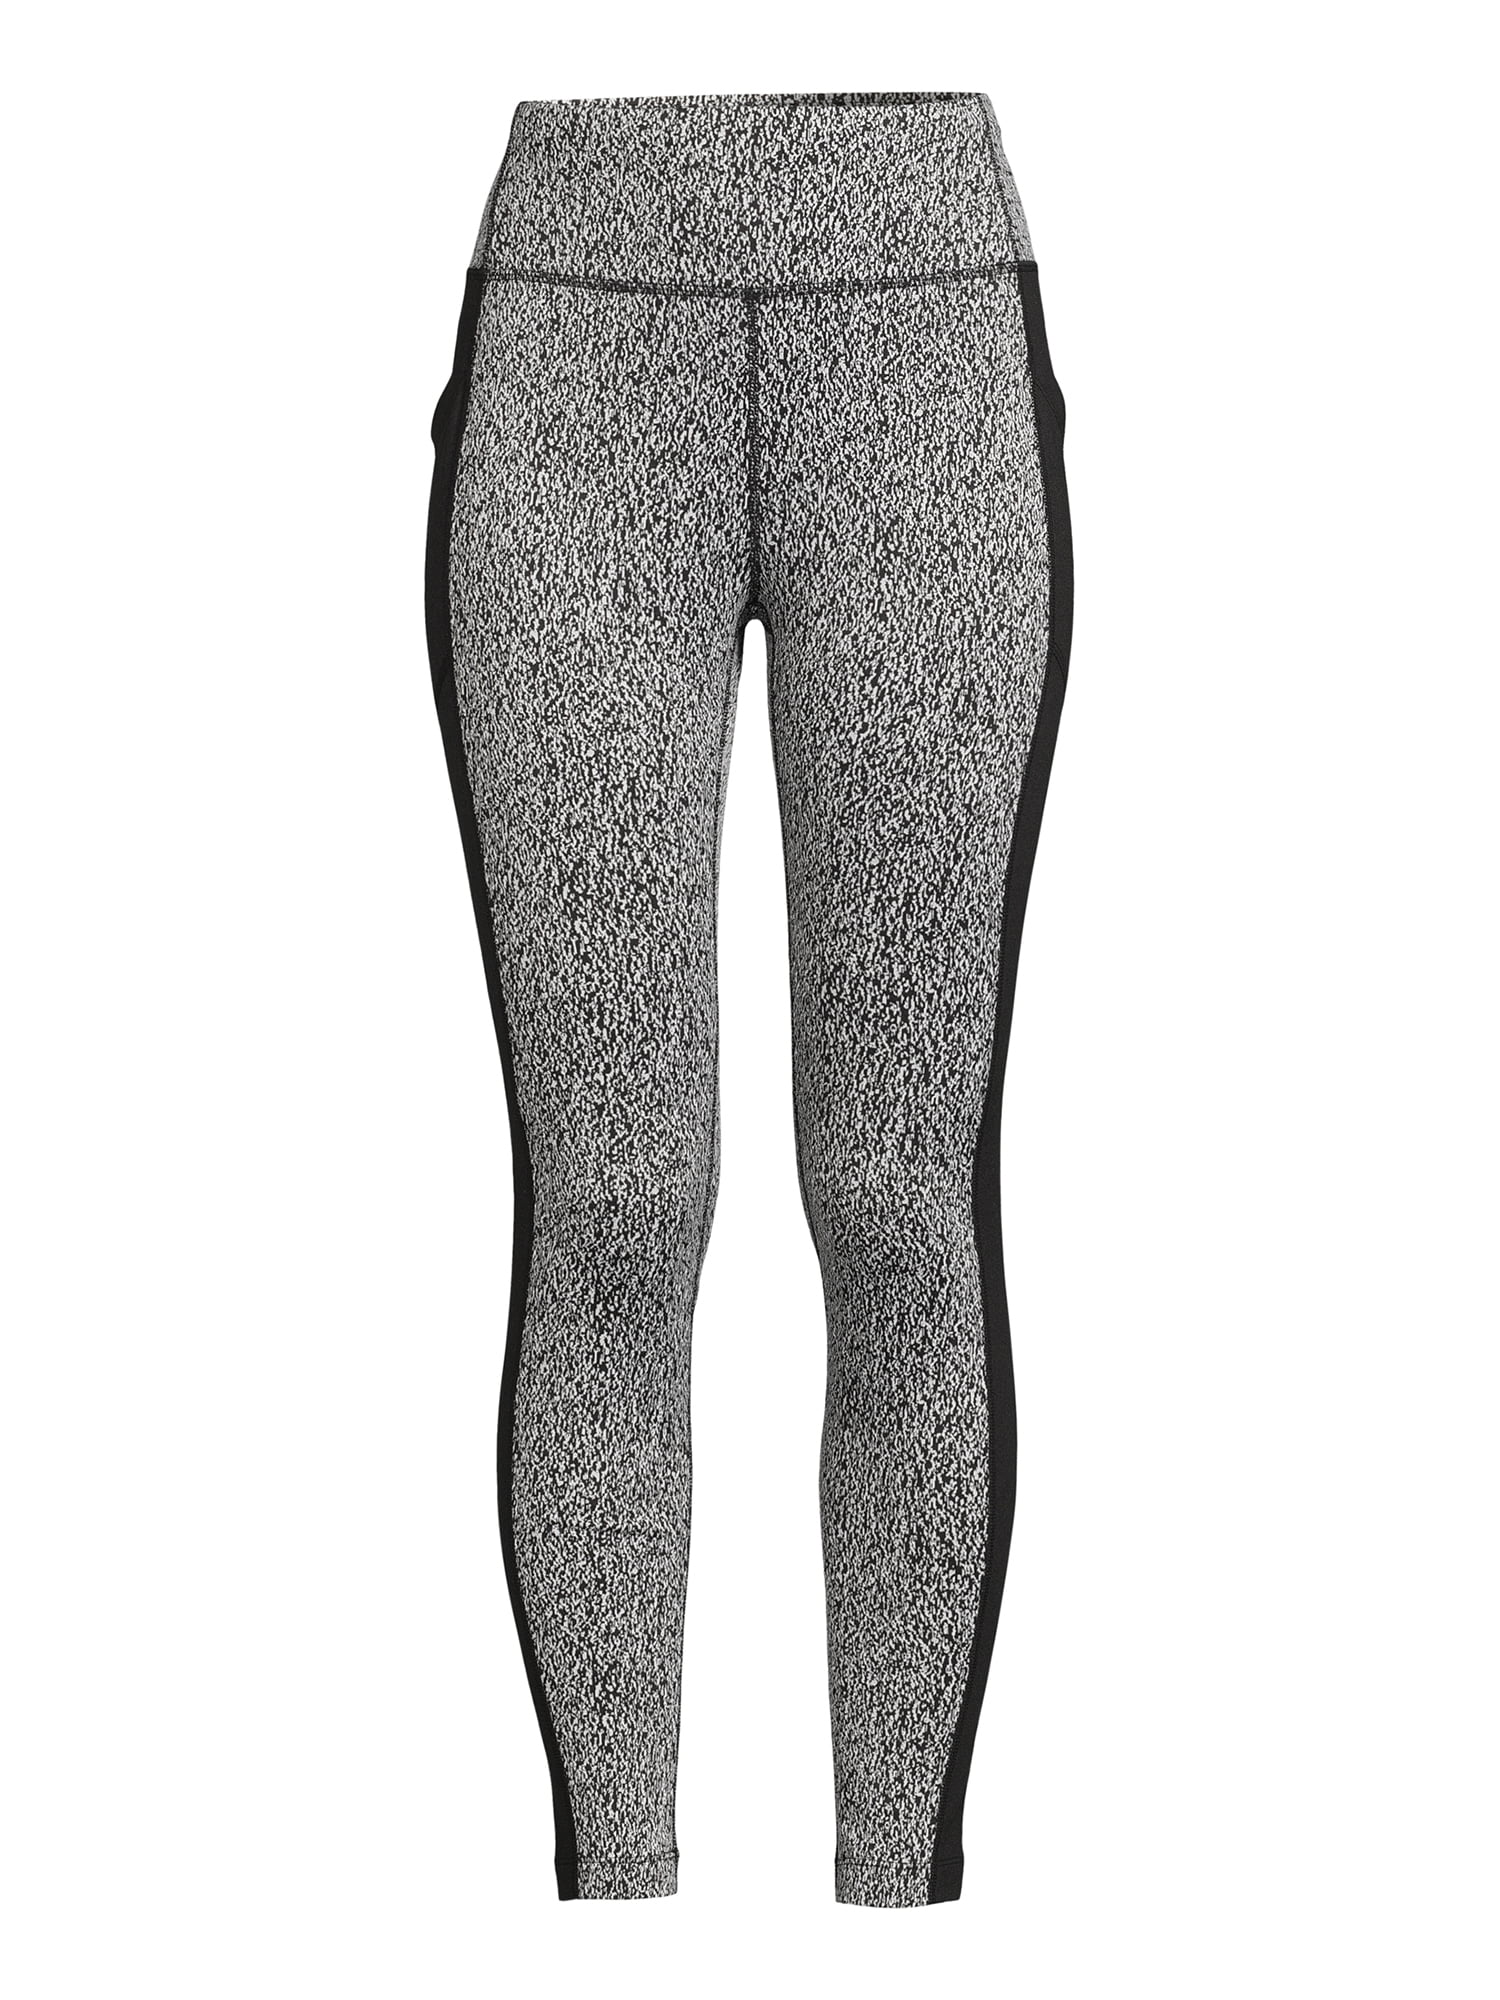 Avia Activewear Leopard Print Women's Brushed Leggings with 2 Side Pockets  Small